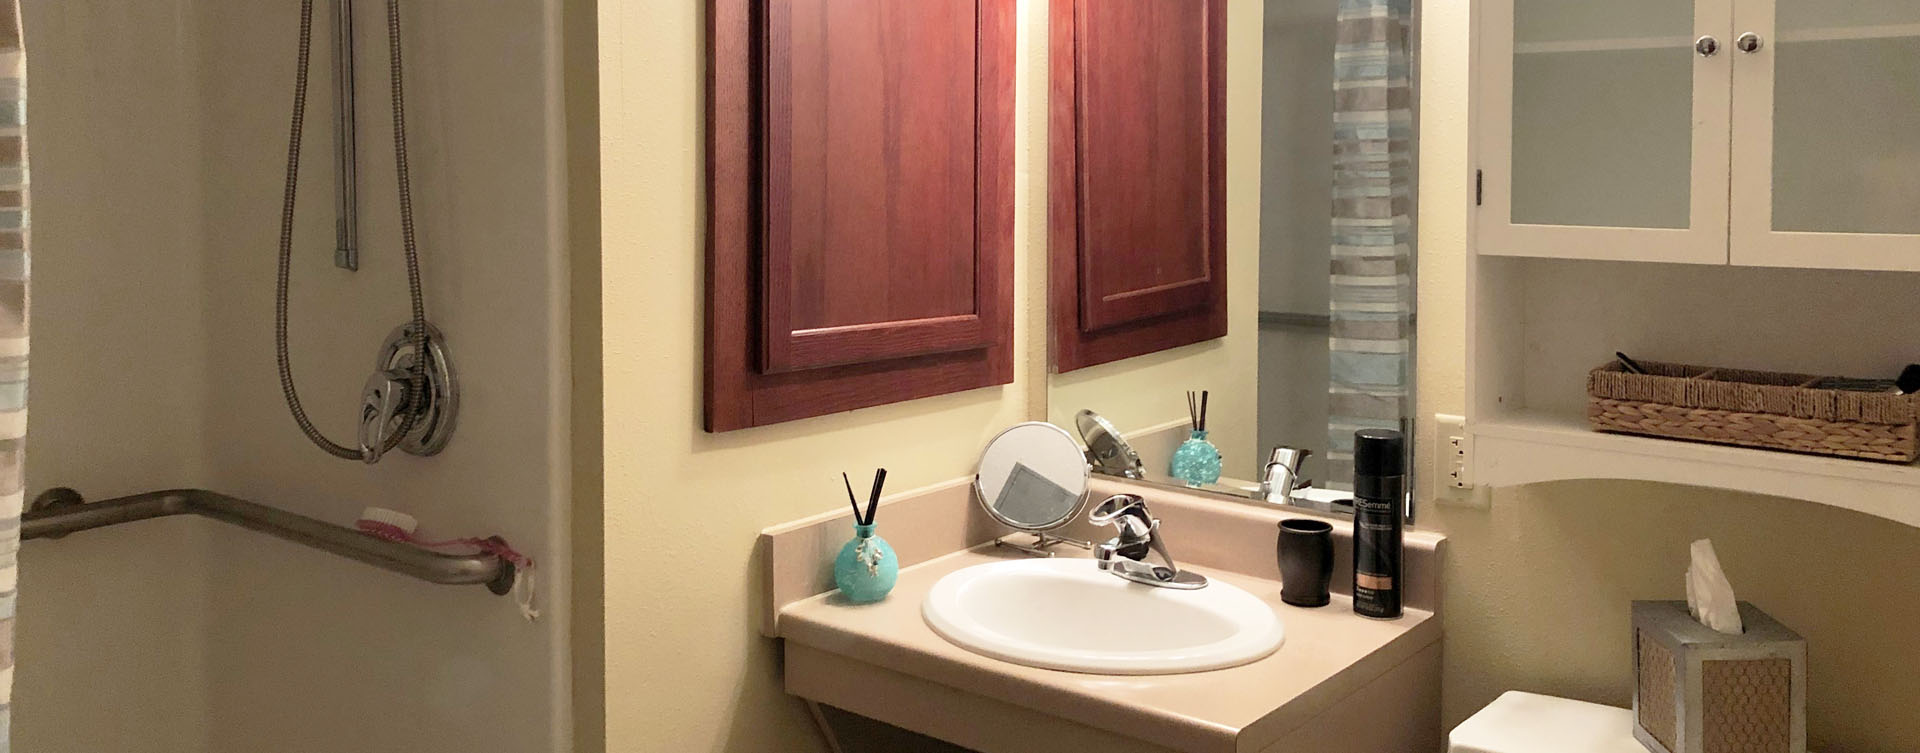 Personalize and decorate to your unique tastes an apartment at Bickford of Bourbonnais